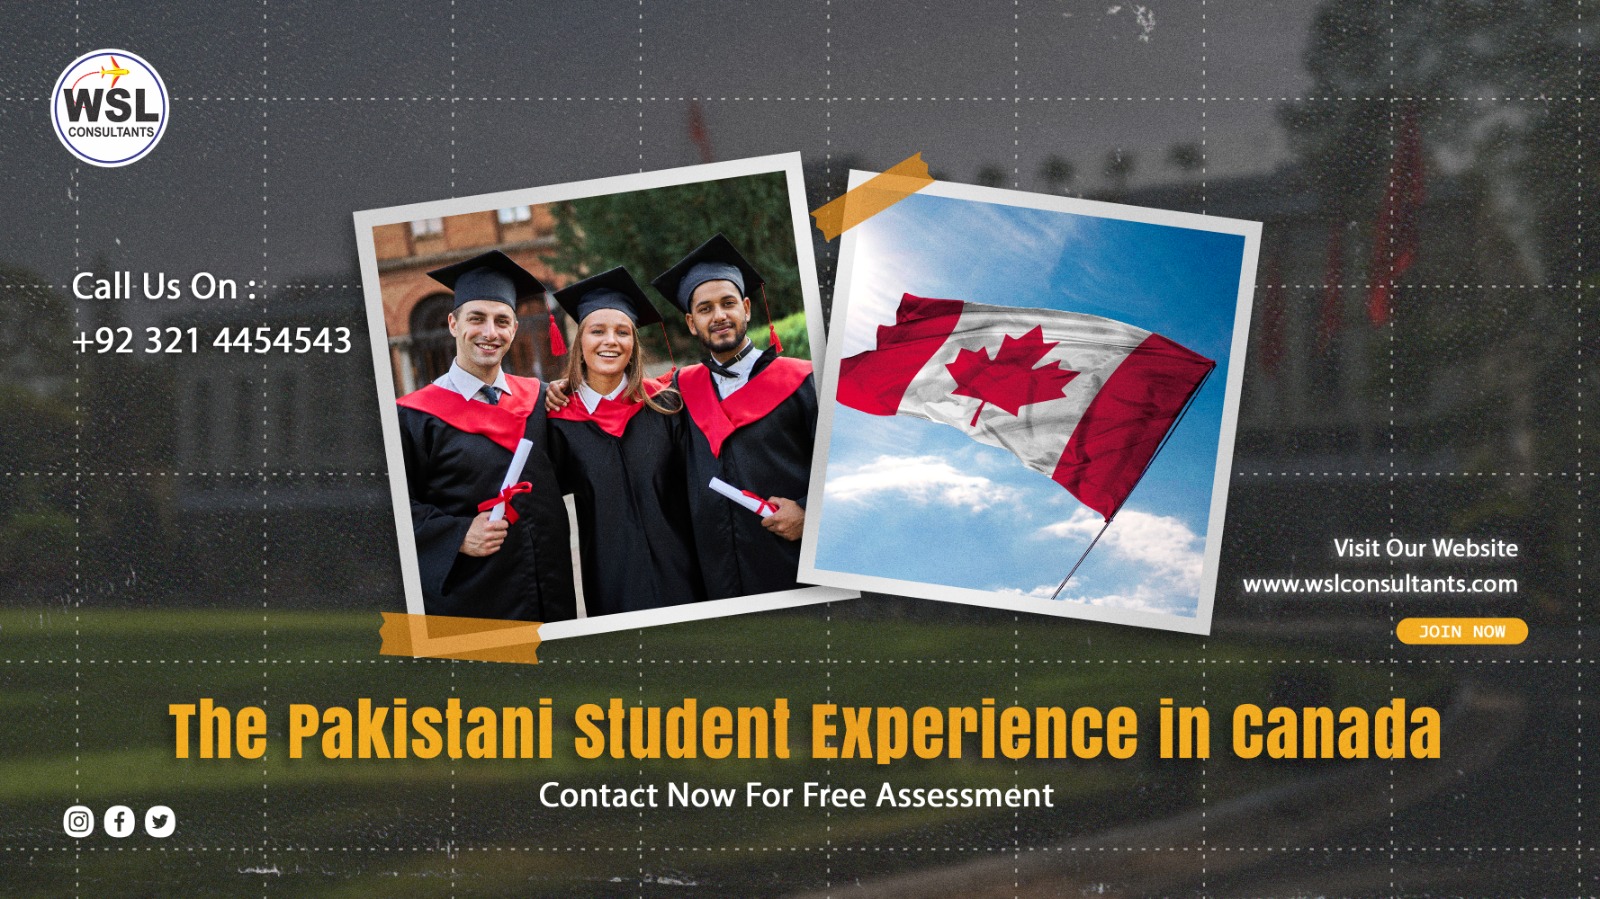 Canada has long been a welcoming destination for international students, and Pakistani students are no exception. With its top-notch educational institutions, diverse culture, and breathtaking landscapes, Canada offers a unique and enriching experience for Pakistani students pursuing higher education abroad. In this article, we'll explore the journey of Pakistani students in Canada, answering key questions about their experiences and opportunities. Does Canada Accept Pakistani Students? One of the most frequently asked questions by Pakistani students is whether Canada accepts them as international students. The short answer is yes! Canada has a robust and inclusive education system that actively encourages international students, including those from Pakistan, to pursue their academic dreams. Canadian universities and colleges warmly welcome students from all corners of the globe. Is Canada Good for Pakistani Students? Canada is not just good for Pakistani students; it's exceptional. The country consistently ranks among the top study destinations worldwide, known for its high-quality education and emphasis on research and innovation. Pakistani students in Canada have access to a wide range of programs, from business and engineering to medicine and the arts. Furthermore, Canada's commitment to diversity ensures a safe and inclusive environment for all, regardless of their cultural or religious background. Student Life in Canada Life as a Pakistani student in Canada is a unique blend of academic rigor and memorable experiences. Canadian cities like Toronto, Vancouver, and Montreal offer a vibrant multicultural atmosphere. Pakistani students often find a community of like-minded individuals who share their journey. Additionally, Canadian institutions provide excellent support services for international students, including orientation programs, counseling, and language assistance. Moreover, the country's stunning natural landscapes provide endless opportunities for exploration. From the Rocky Mountains in Alberta to the pristine lakes in Ontario, there's no shortage of outdoor adventures. Pakistani students can partake in hiking, skiing, and other recreational activities while taking a break from their studies. To gain firsthand insights into the Pakistani student experience in Canada, you can read personal accounts on platforms like Quora. Success Rate of Pakistani Student Visas to Canada Securing a student visa is a crucial step for Pakistani students wishing to study in Canada. While the process may seem daunting, it's important to note that Canada values its international student community. The success rate for Pakistani student visas to Canada is generally high, provided applicants meet the necessary criteria and fulfill the requirements. It's essential to prepare a strong application, including proof of financial support, a letter of acceptance from a recognized Canadian institution, and a clear study plan. Consulting with trusted education consultants can also enhance your chances of a successful student visa application. Organizations like WSL Consultants specialize in guiding Pakistani students through the application process, ensuring that all necessary documents are in order. In Conclusion For Pakistani students, Canada offers an enriching and rewarding educational experience. With its welcoming environment, top-tier institutions, and vast opportunities for personal and academic growth, Canada stands out as an excellent choice for higher education. Pakistani students can not only achieve their academic aspirations but also build lifelong memories in a diverse and inclusive Canadian society. Pakistani Students in Canada